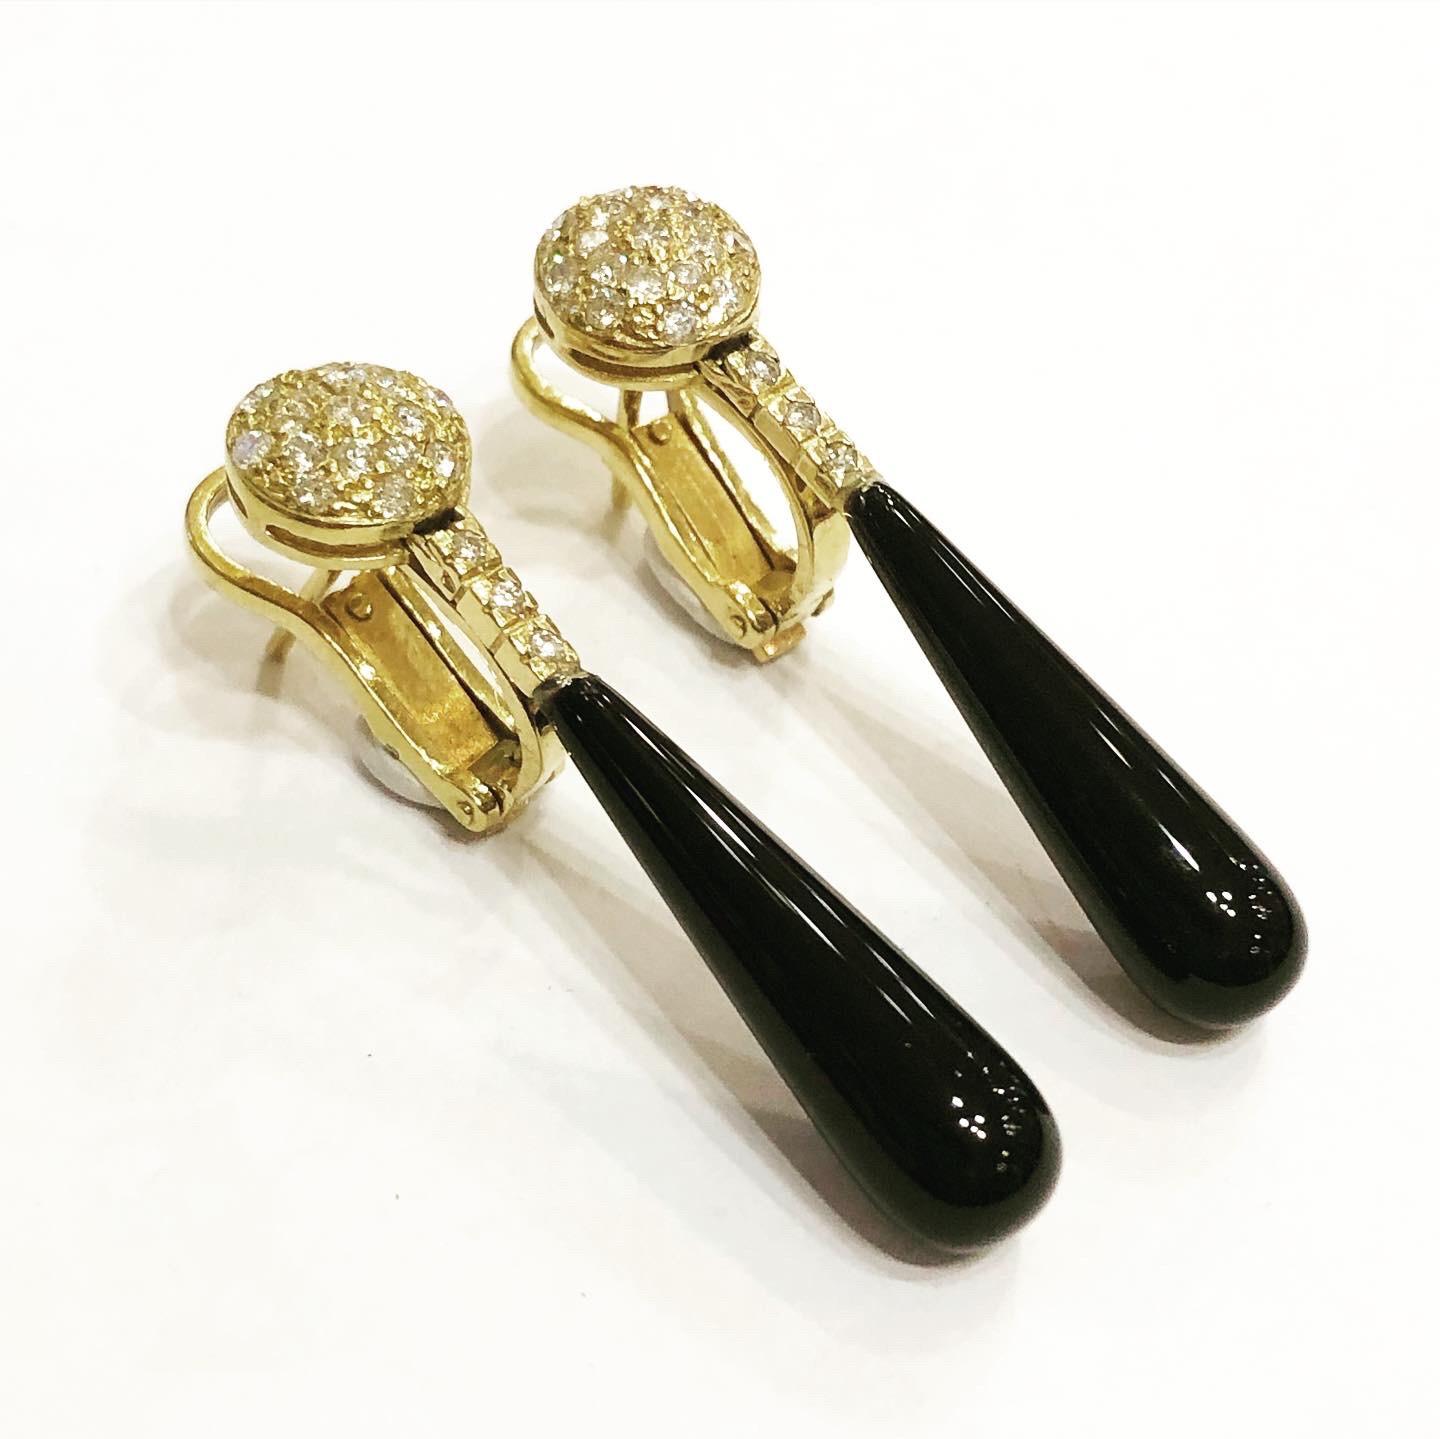 Stylish Onyx 18 Karat Yellow Gold Tear Drop Long Earrings.
Omega Clipon.
Diamond approximate carat weight: 0.8 carat.
Circa 1960.
The perfect touch full of modernity with a tear drop and dangle design.
Length: 4 cm.
Width: 0.8 cm.
Weight: 9